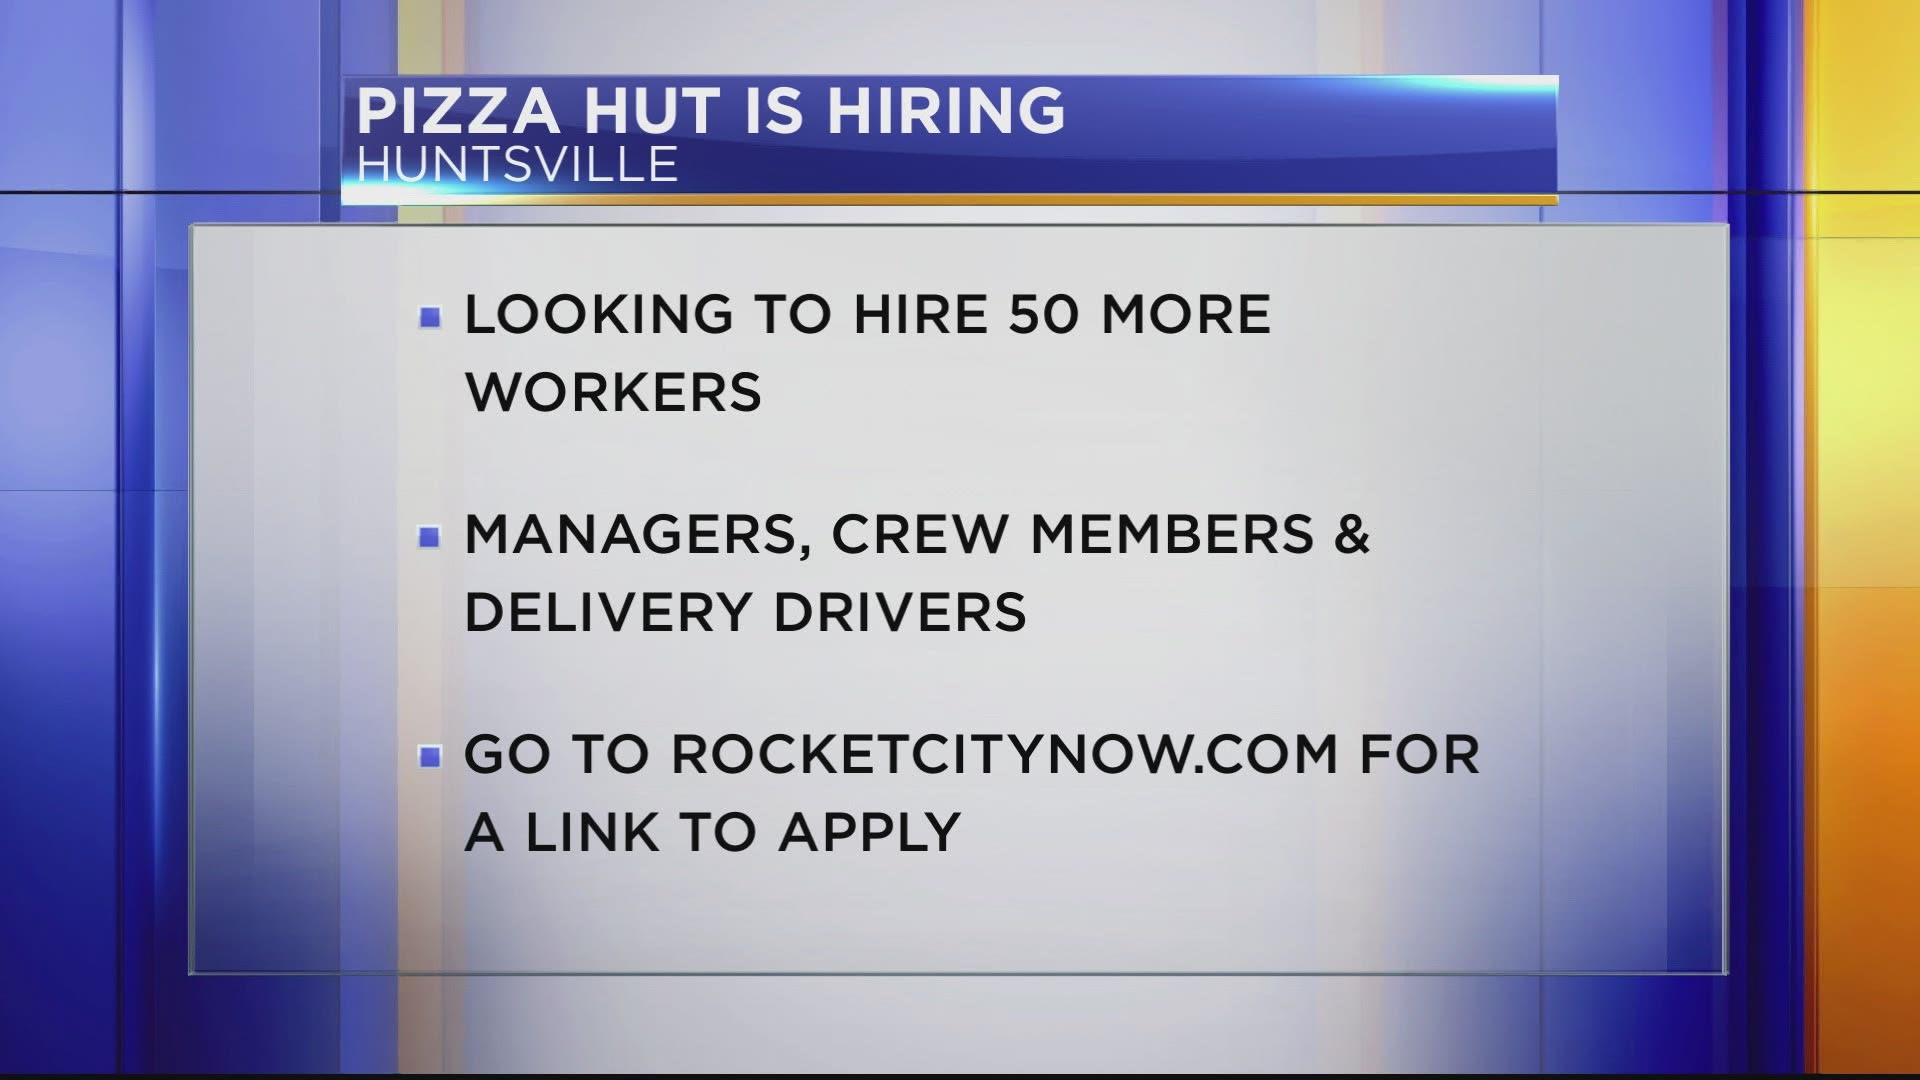 GPS Hospitality is hiring managers, crew members and Pizza Hut delivery drivers at its Pizza Hut locations in the Huntsville area.